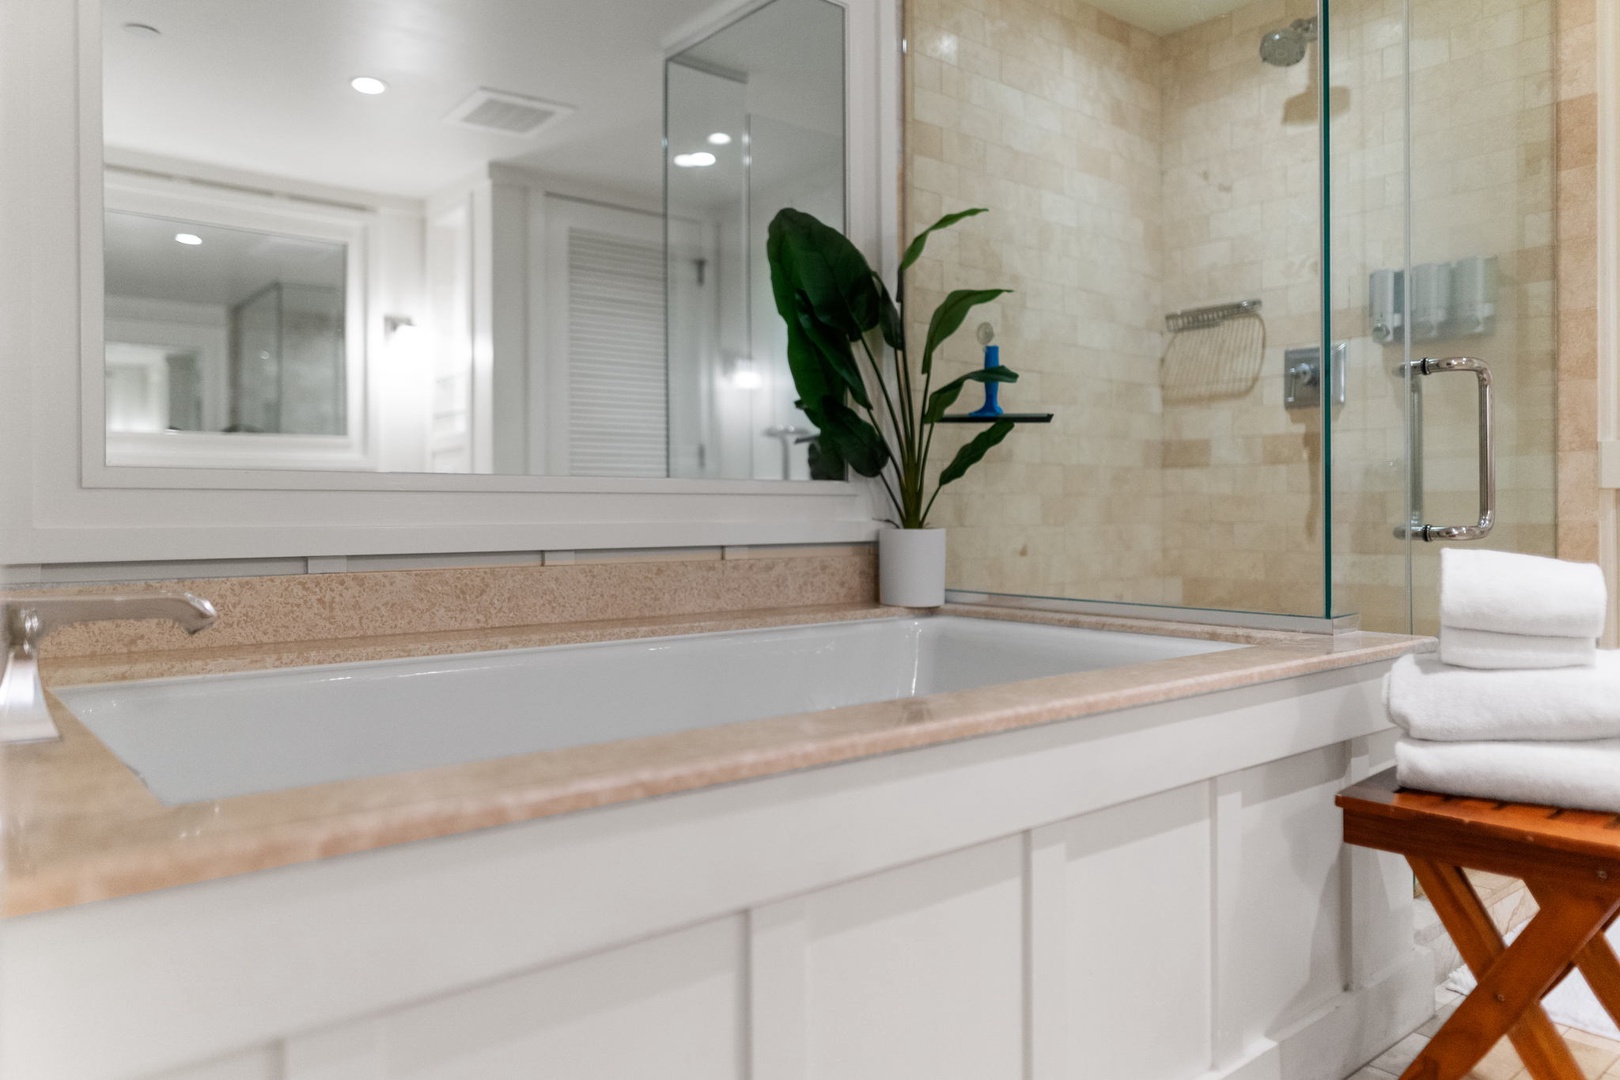 Kahuku Vacation Rentals, Turtle Bay Villas 114 - Relax and unwind in the soaking tub